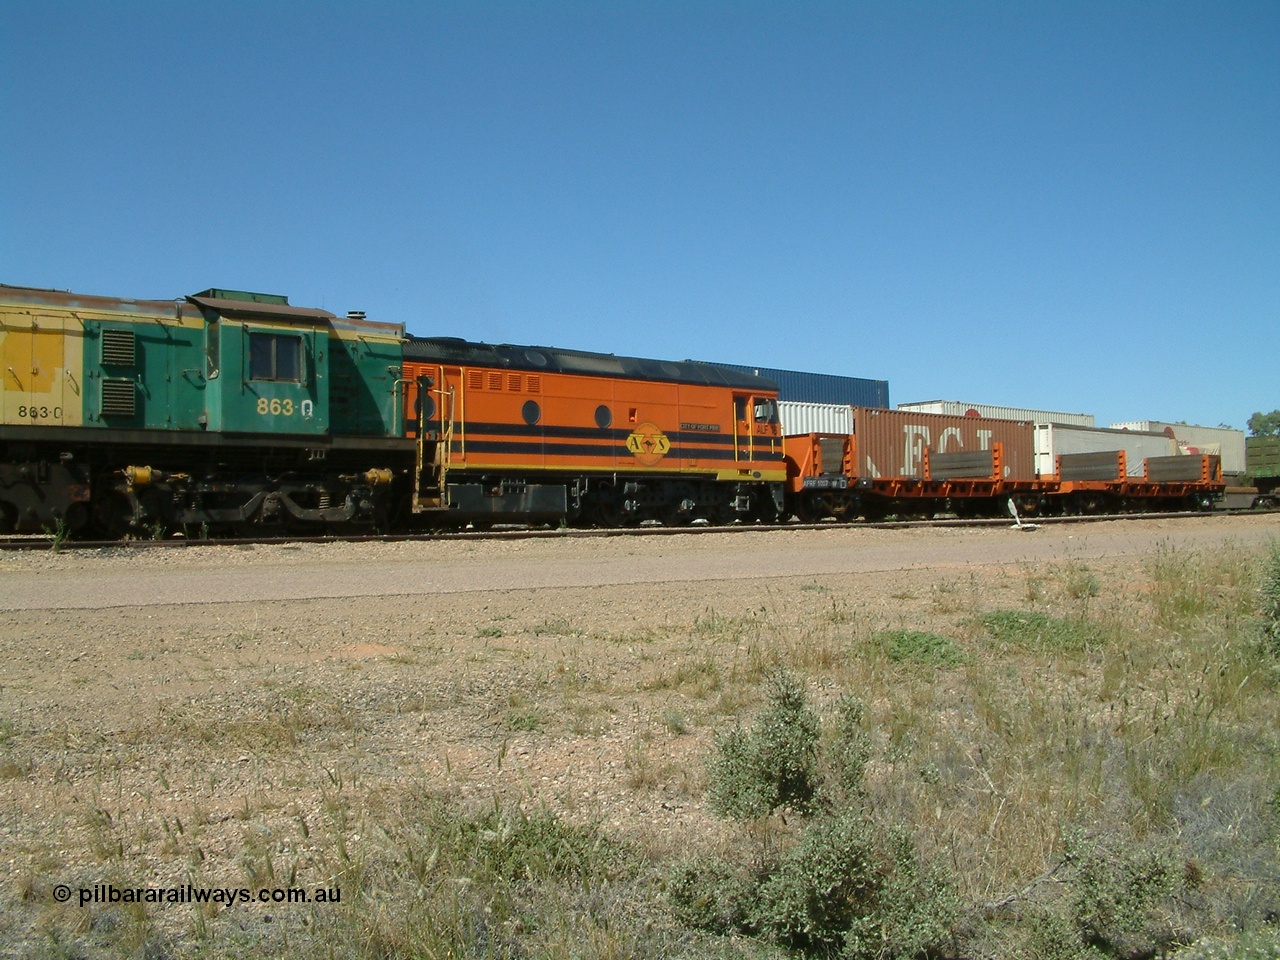 030404 131846
Port Augusta, Spencer Junction shunt loco 830 class unit 863 serial 84709 is an AE Goodwin built ALCo DL531 model and entered service in June 1963. 4th April 2003.
Keywords: 830-class;863;AE-Goodwin;ALCo;DL531;84709;